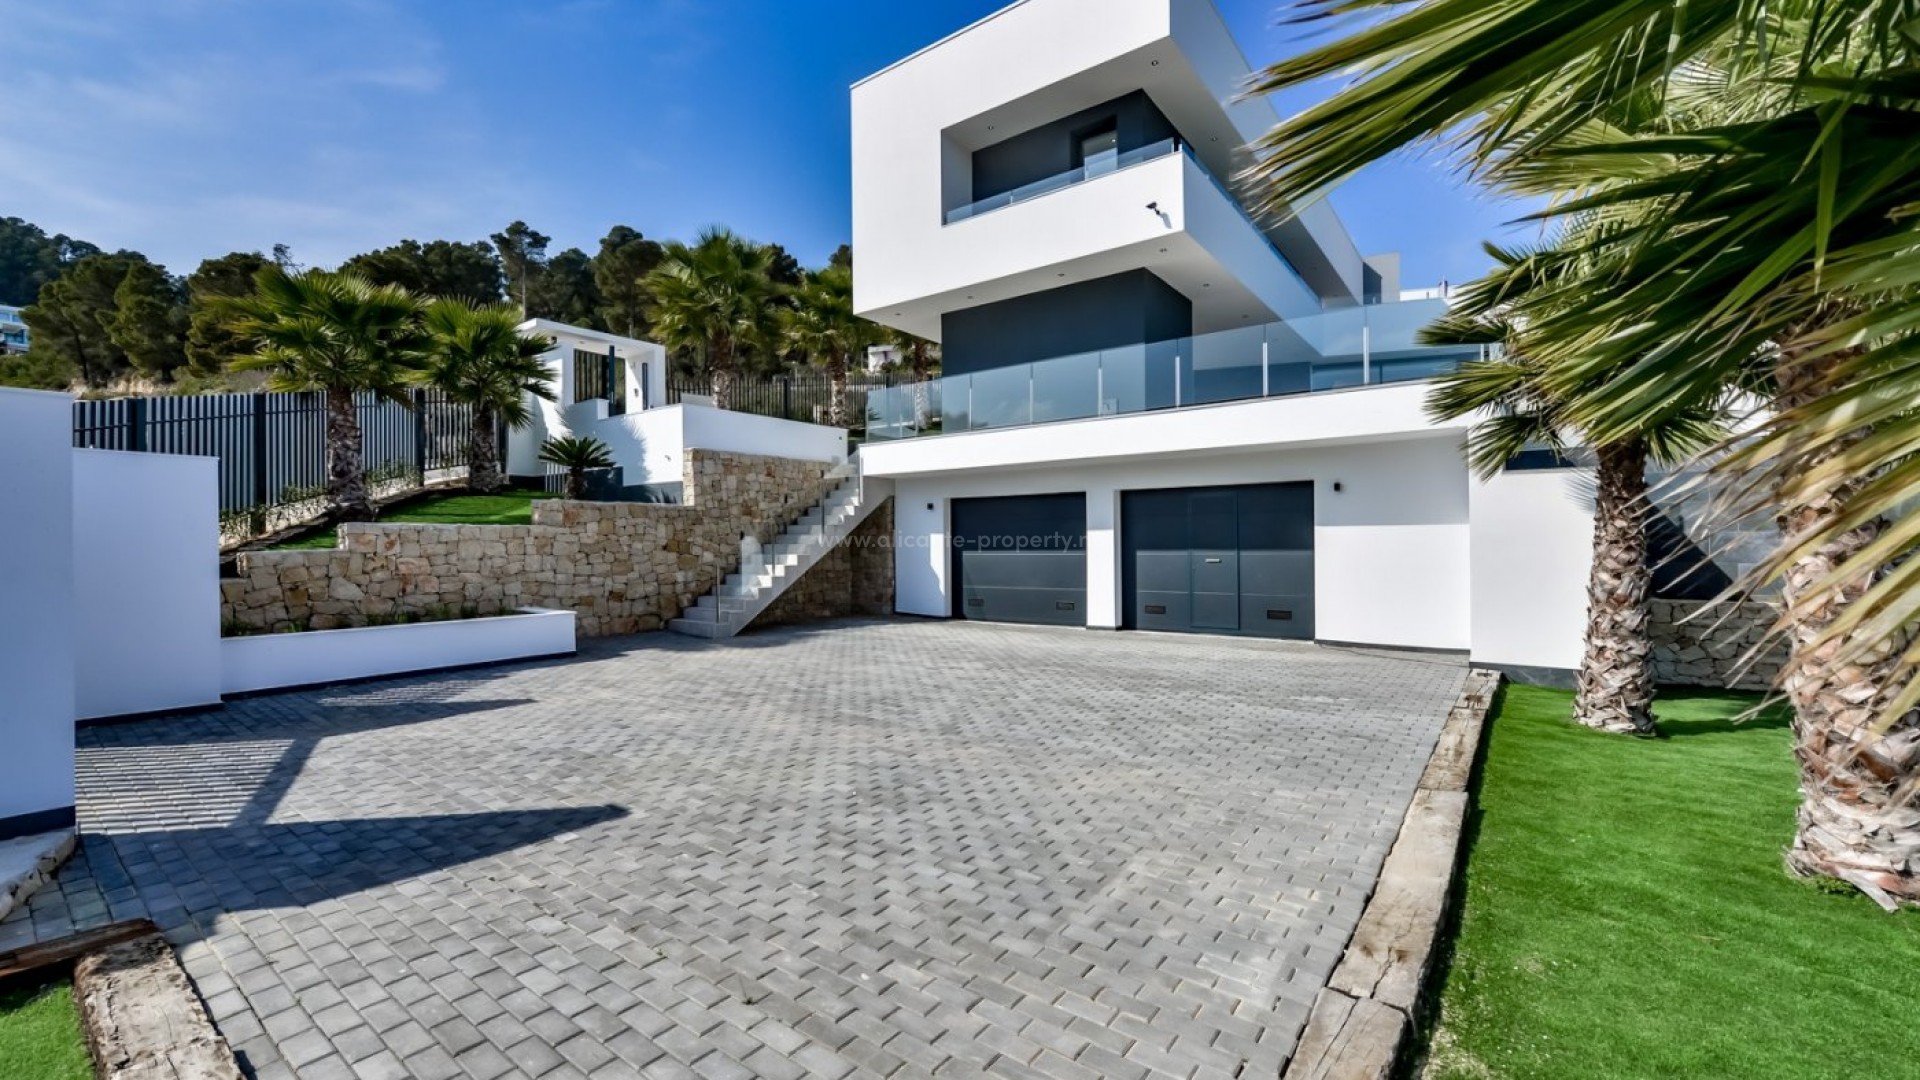 Modern luxury villa in Tosalet near Javea with sea view, 3 bedrooms, 3 bathrooms, swimming pool, large covered terrace with barbecue area